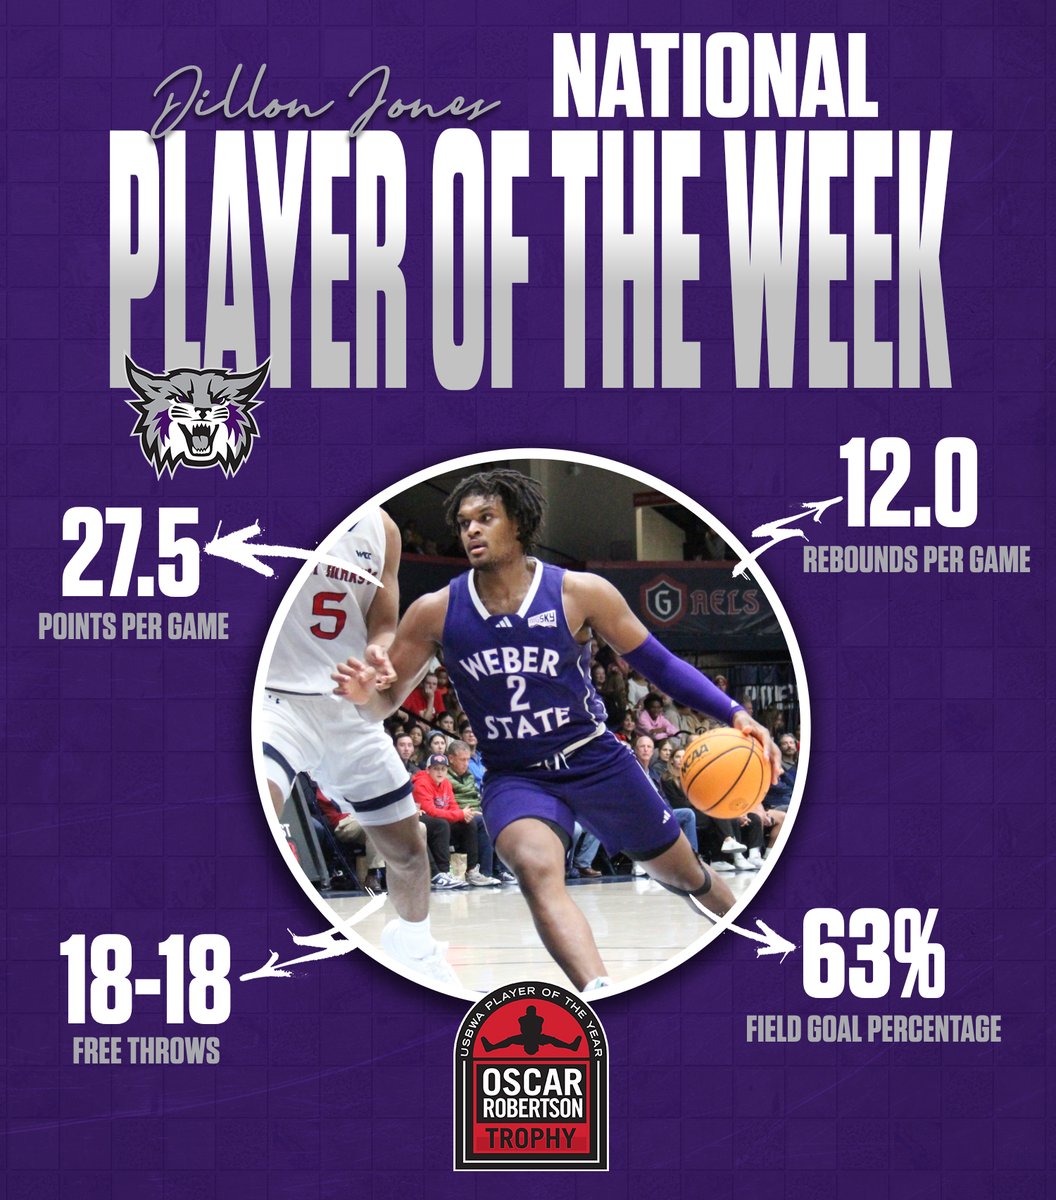 NATIONAL PLAYER OF THE WEEK! Weber State's Dillon Jones has been named National Player of the Week by the @USBWA for his performance in two Wildcat wins last week! Congrats @drizzydj23! 👏 weberstatesports.com/news/2023/11/1… #WeAreWeber